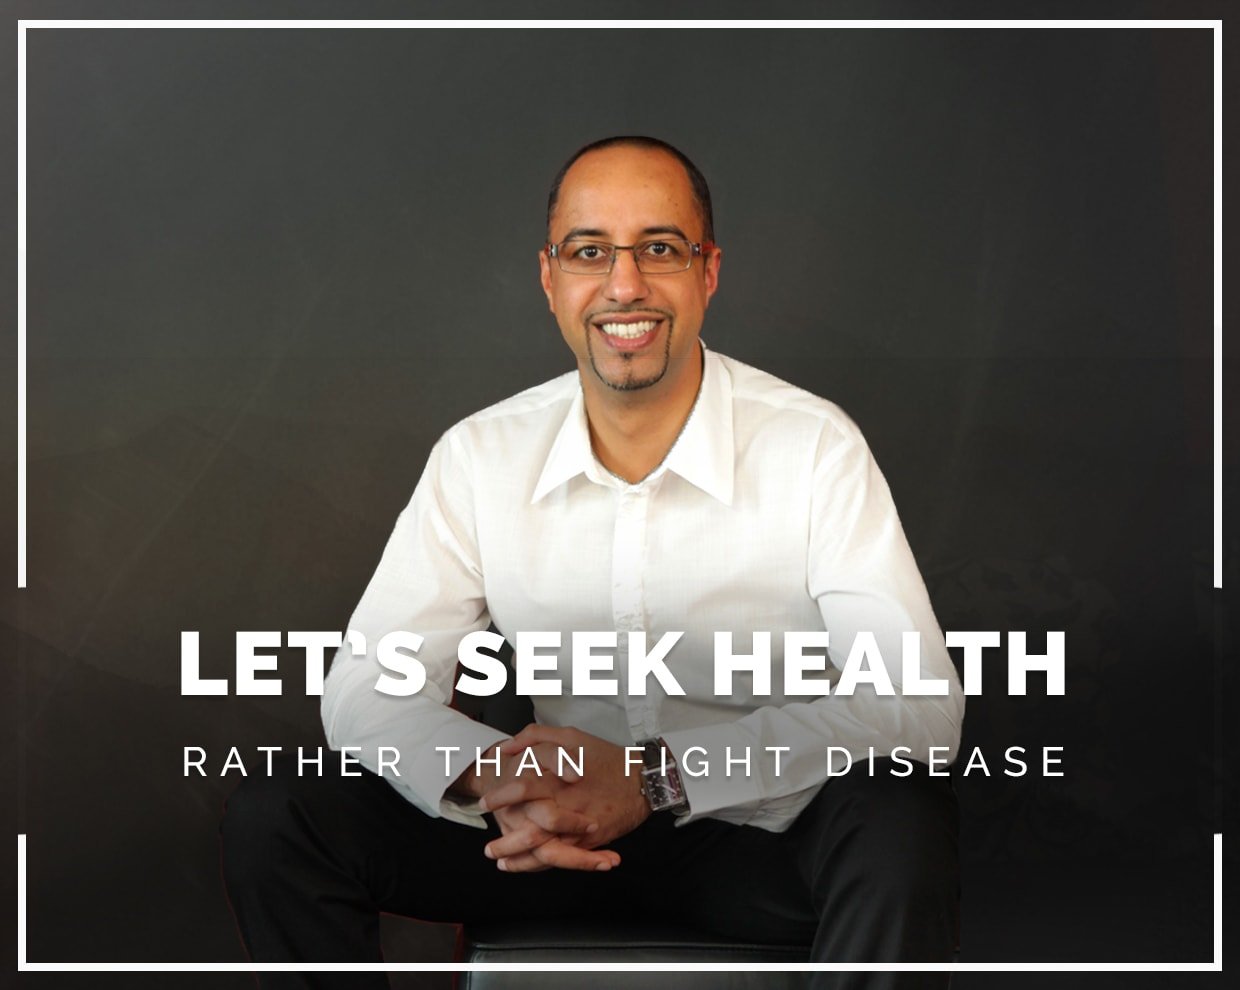 Interview with Dr Hisham - Let's seek health